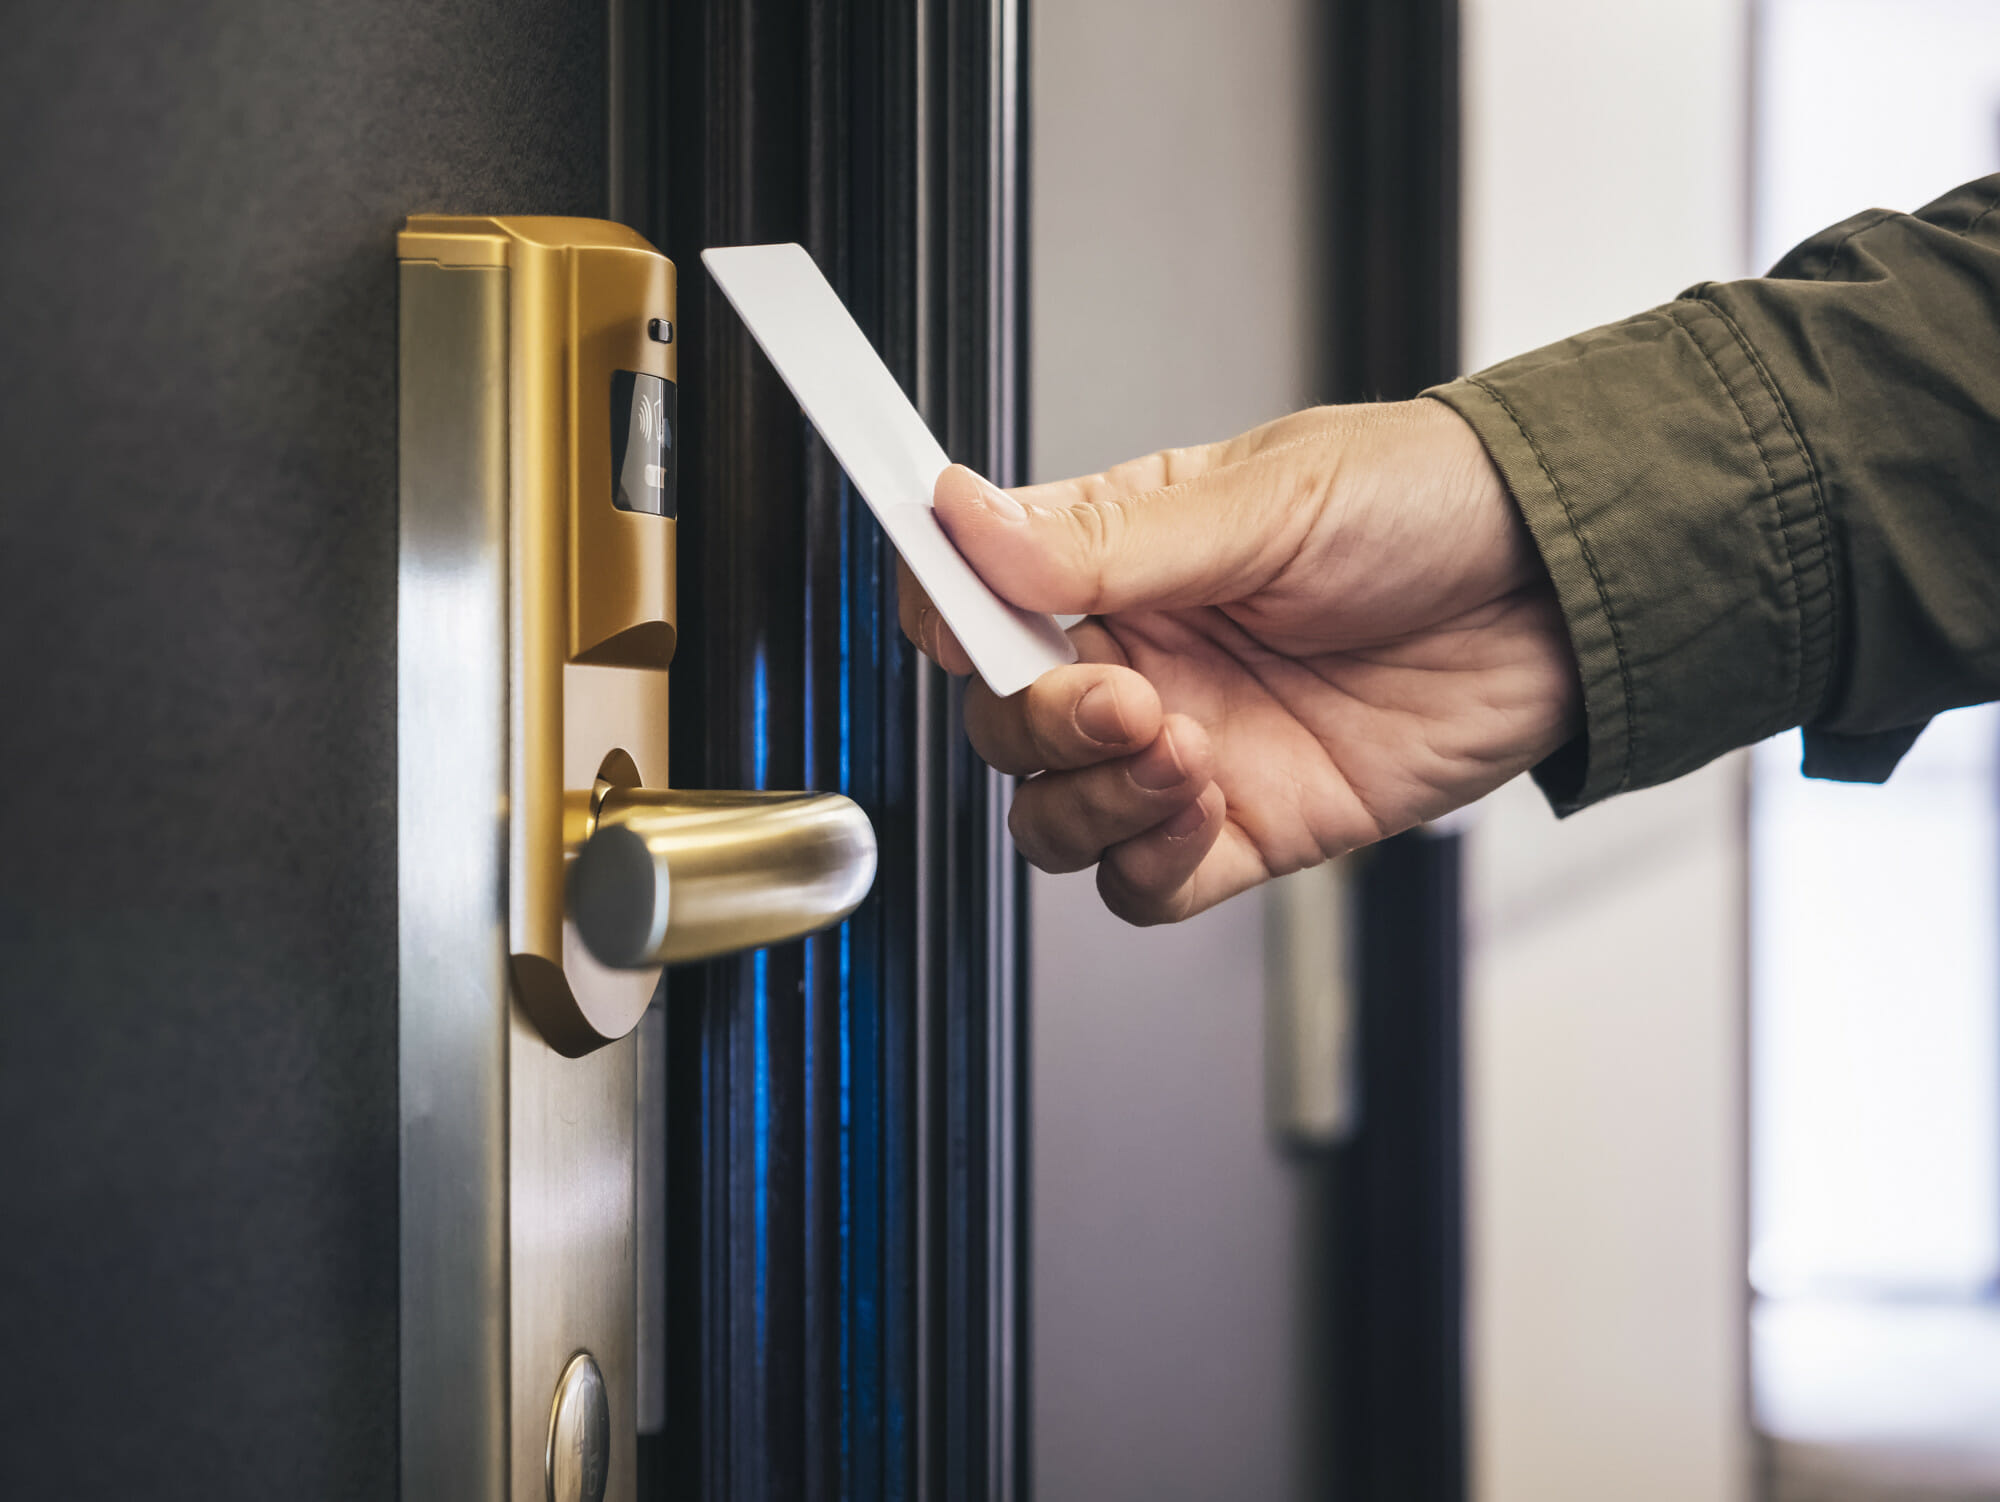 IT security in Los Angeles starts with access control